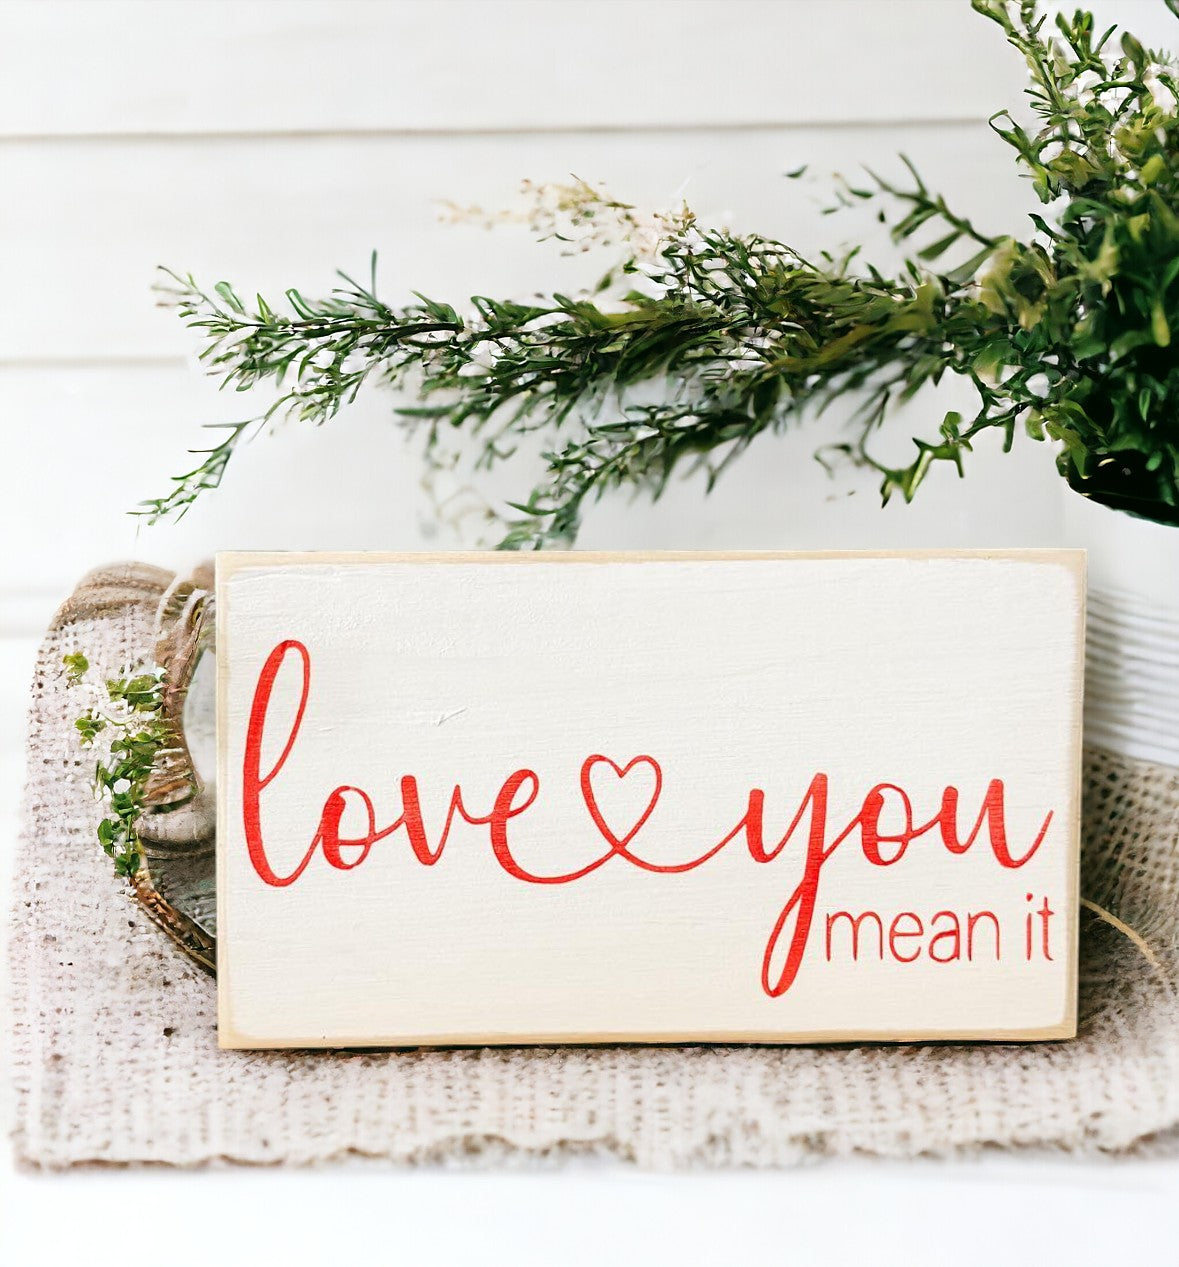 Love You Mean It Wood Block Sign